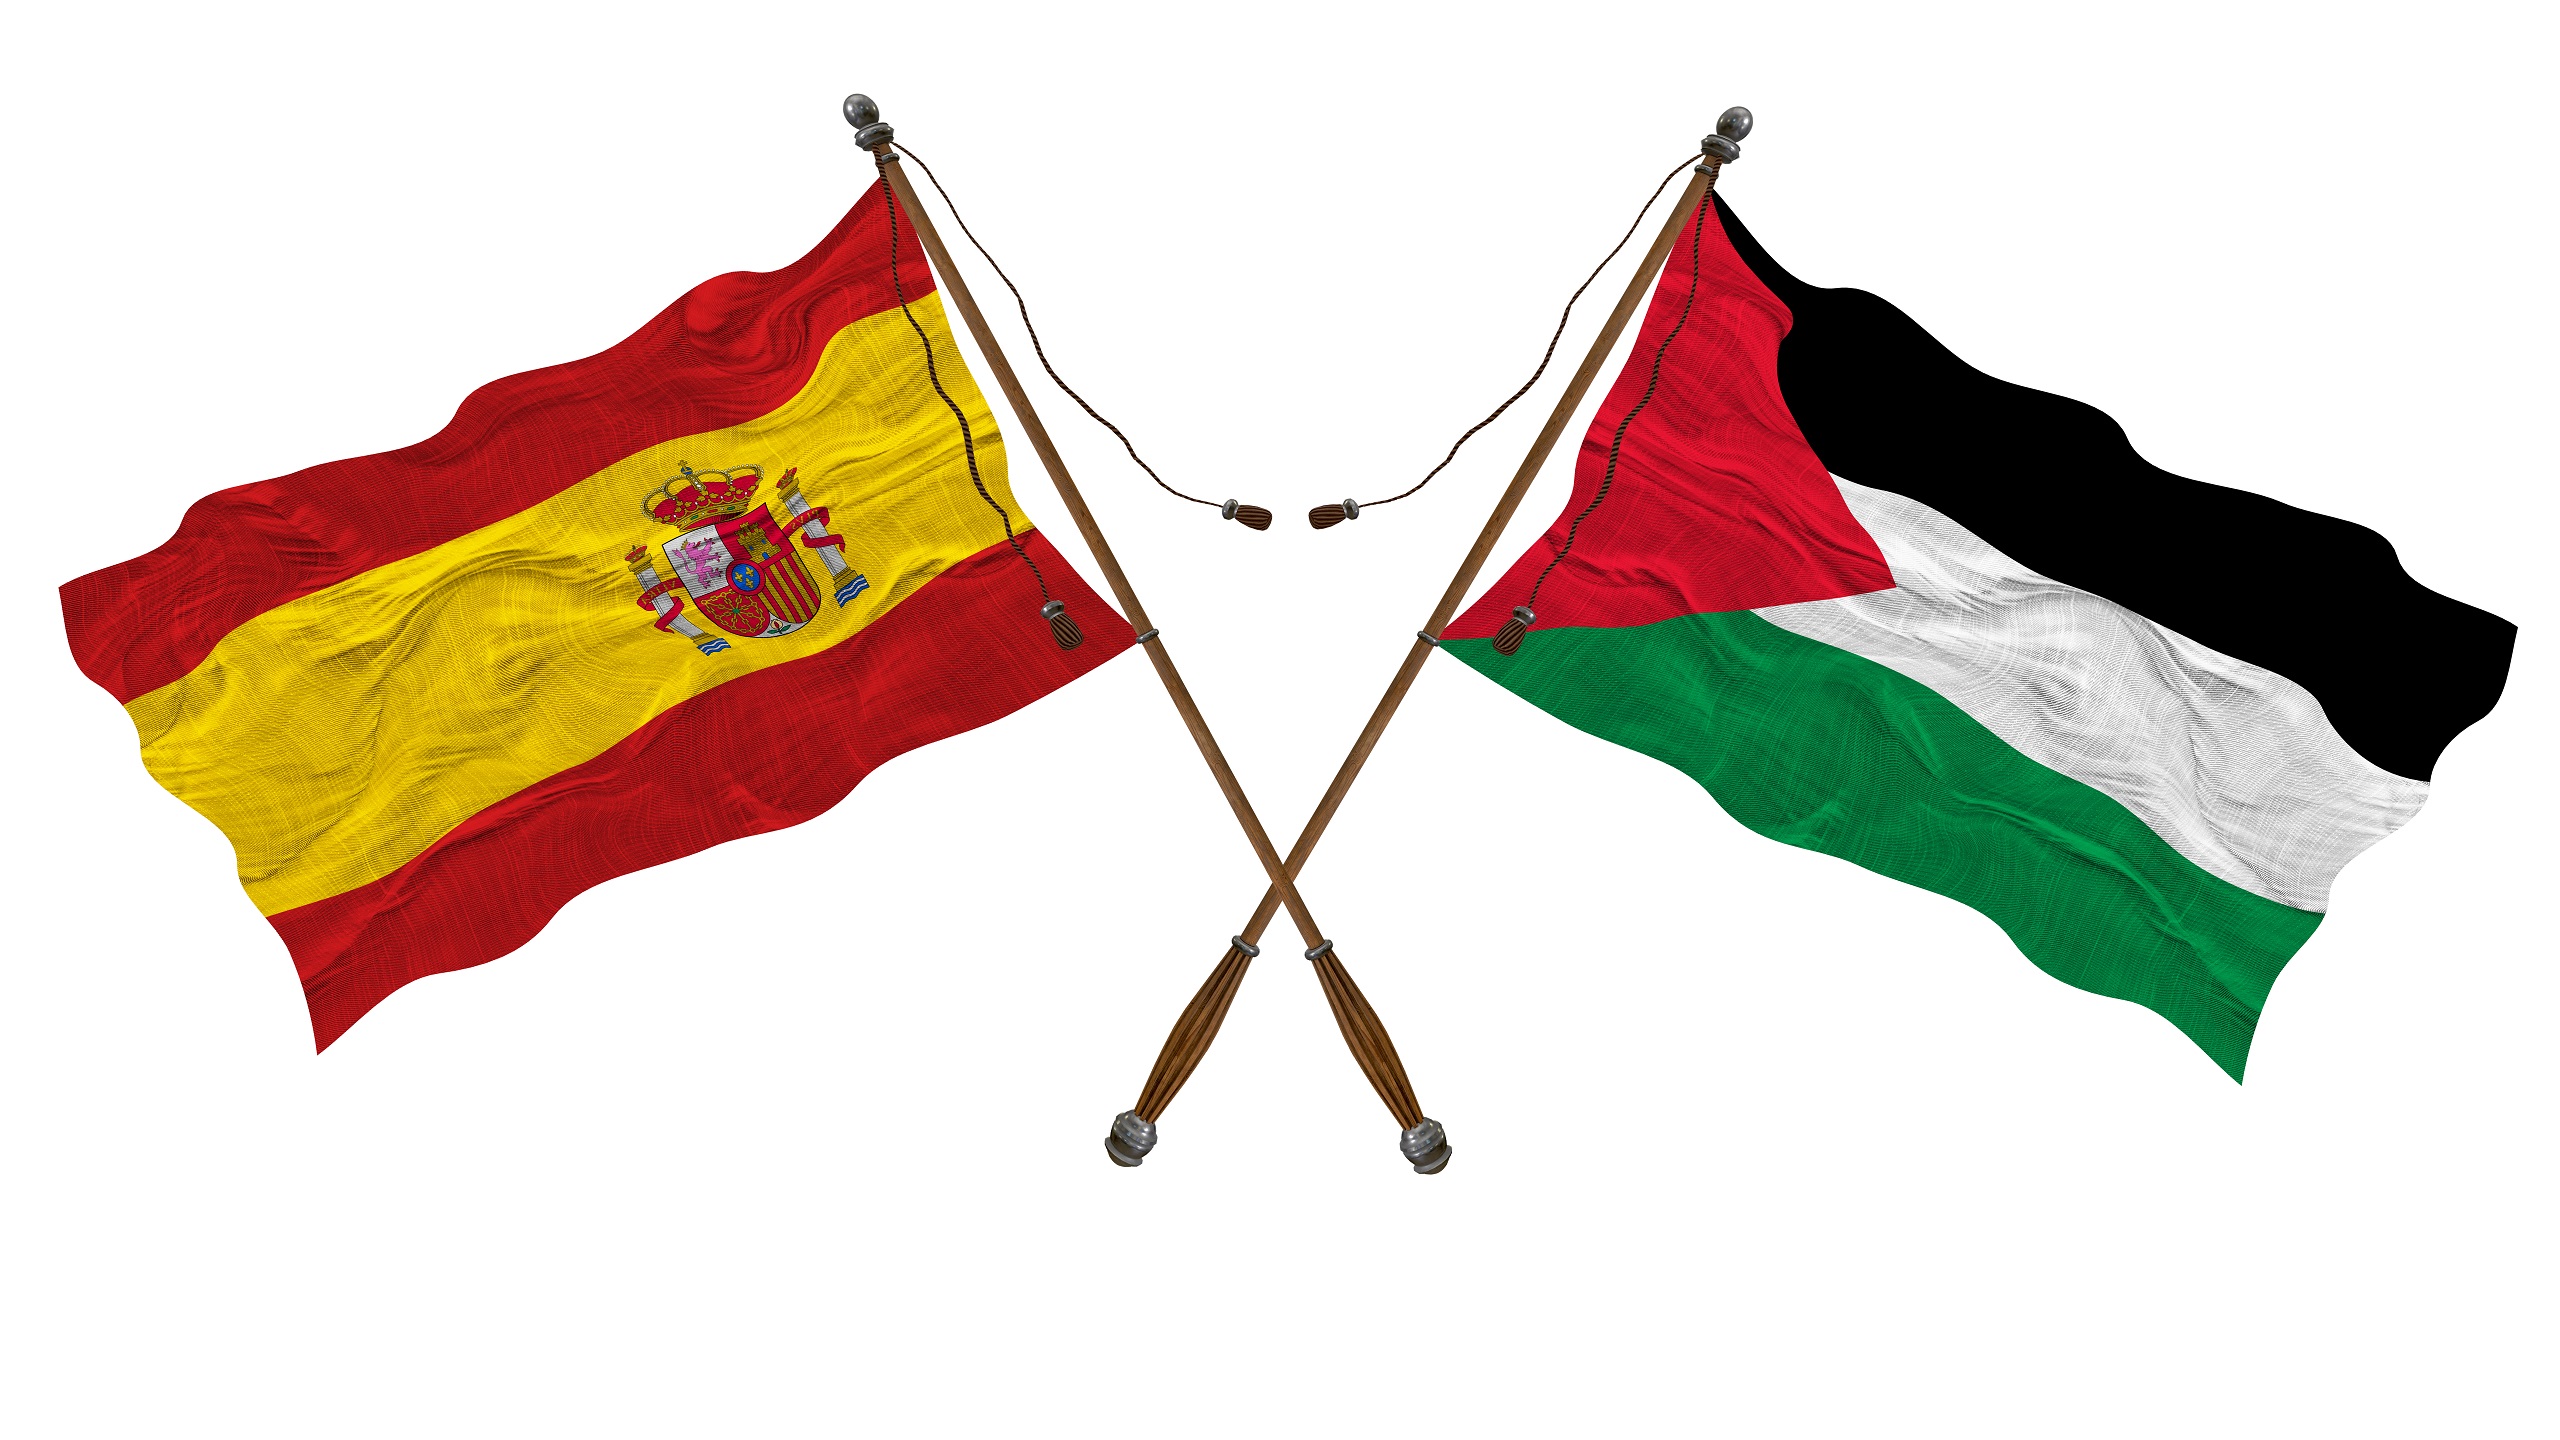 Spain’s Promise To Recognize Palestinian Statehood by July Raises Eyebrows